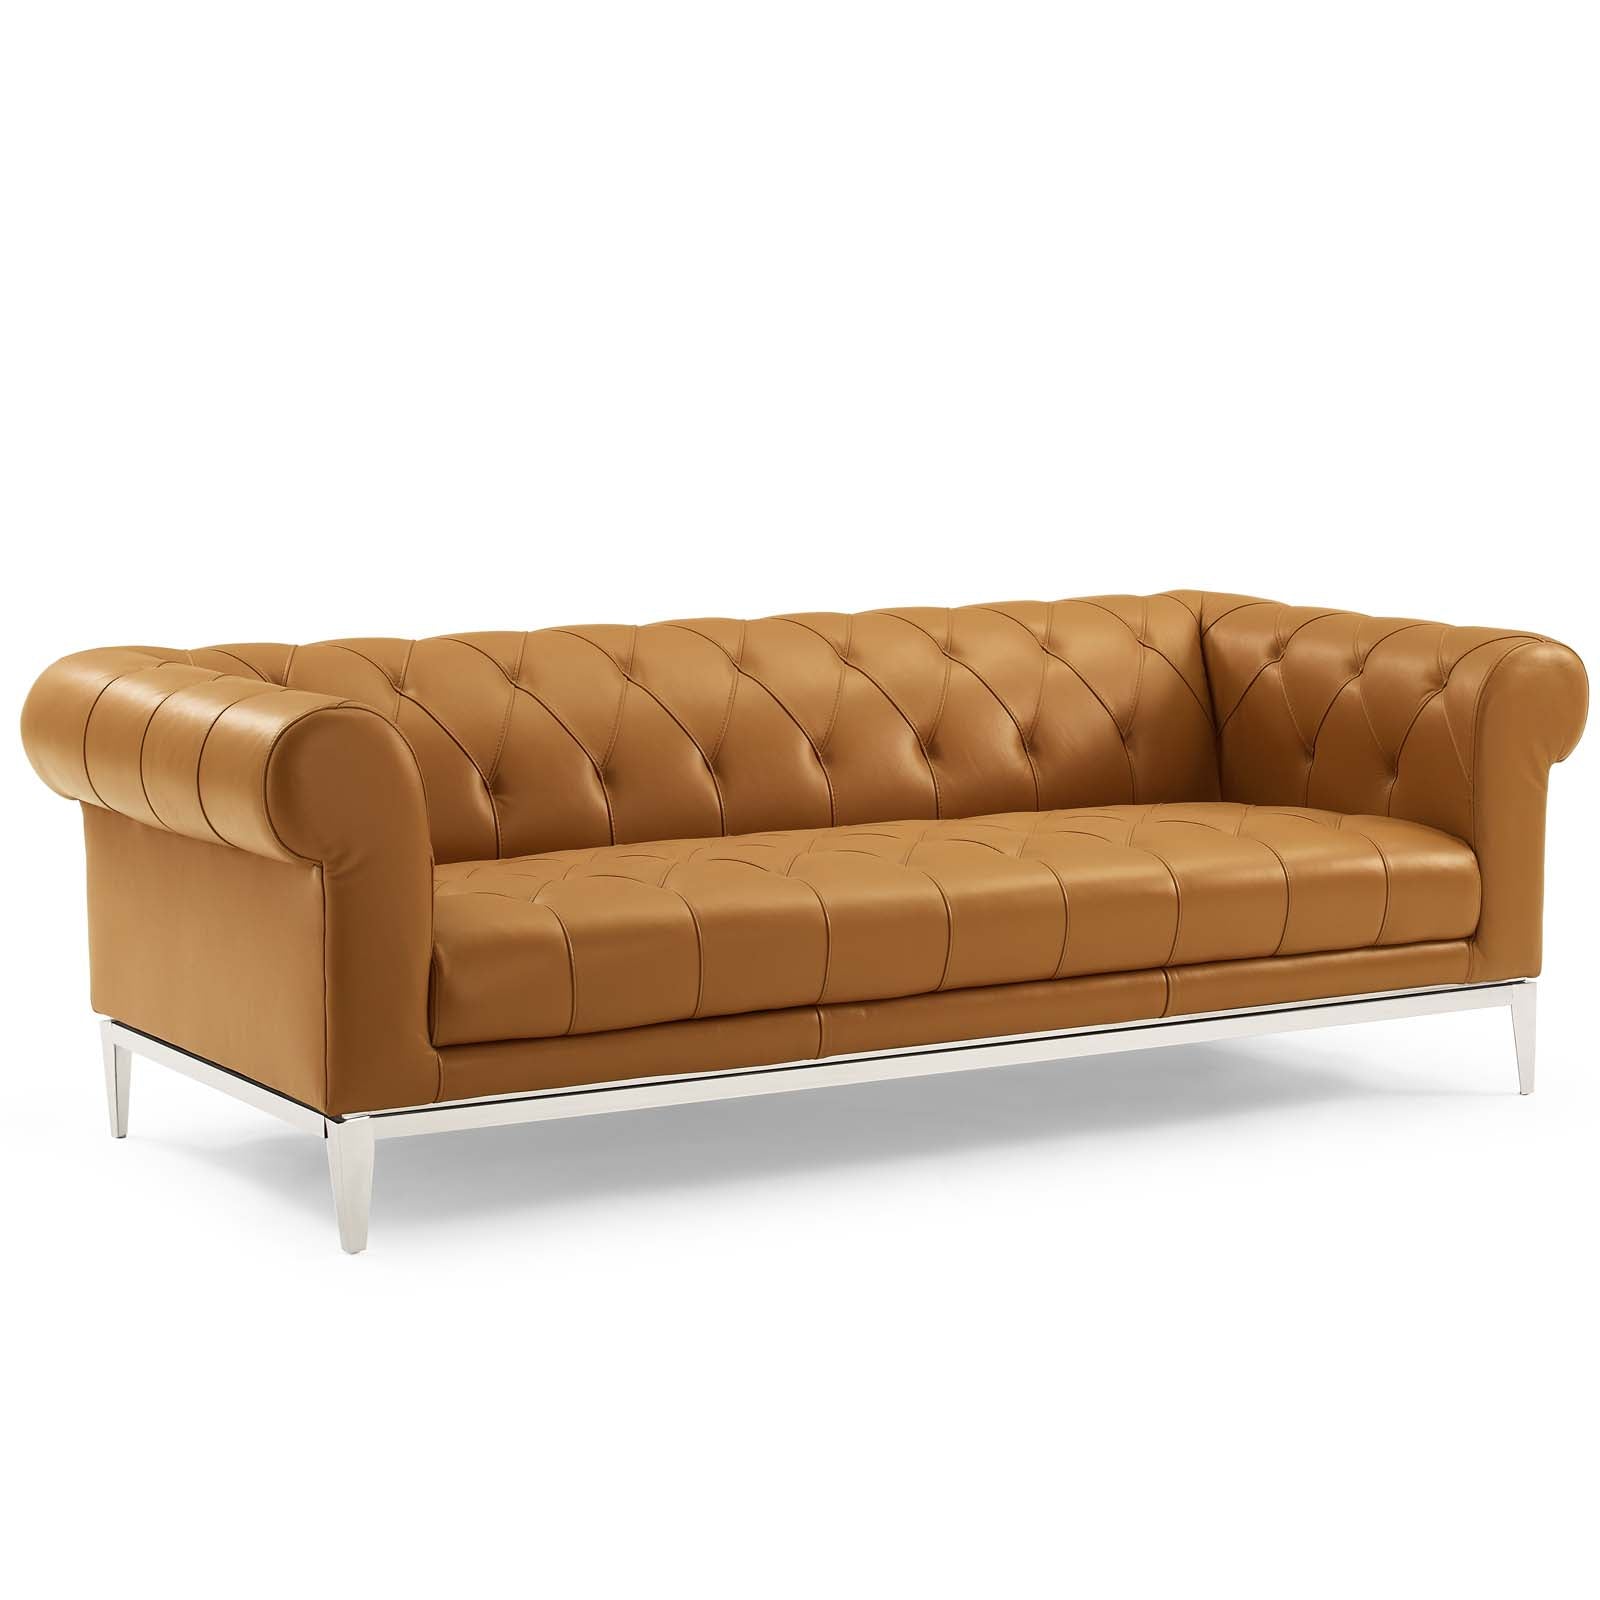 Modway Sofas & Couches - Idyll-Tufted-Upholstered-Leather-Sofa-and-Loveseat-Set-Tan